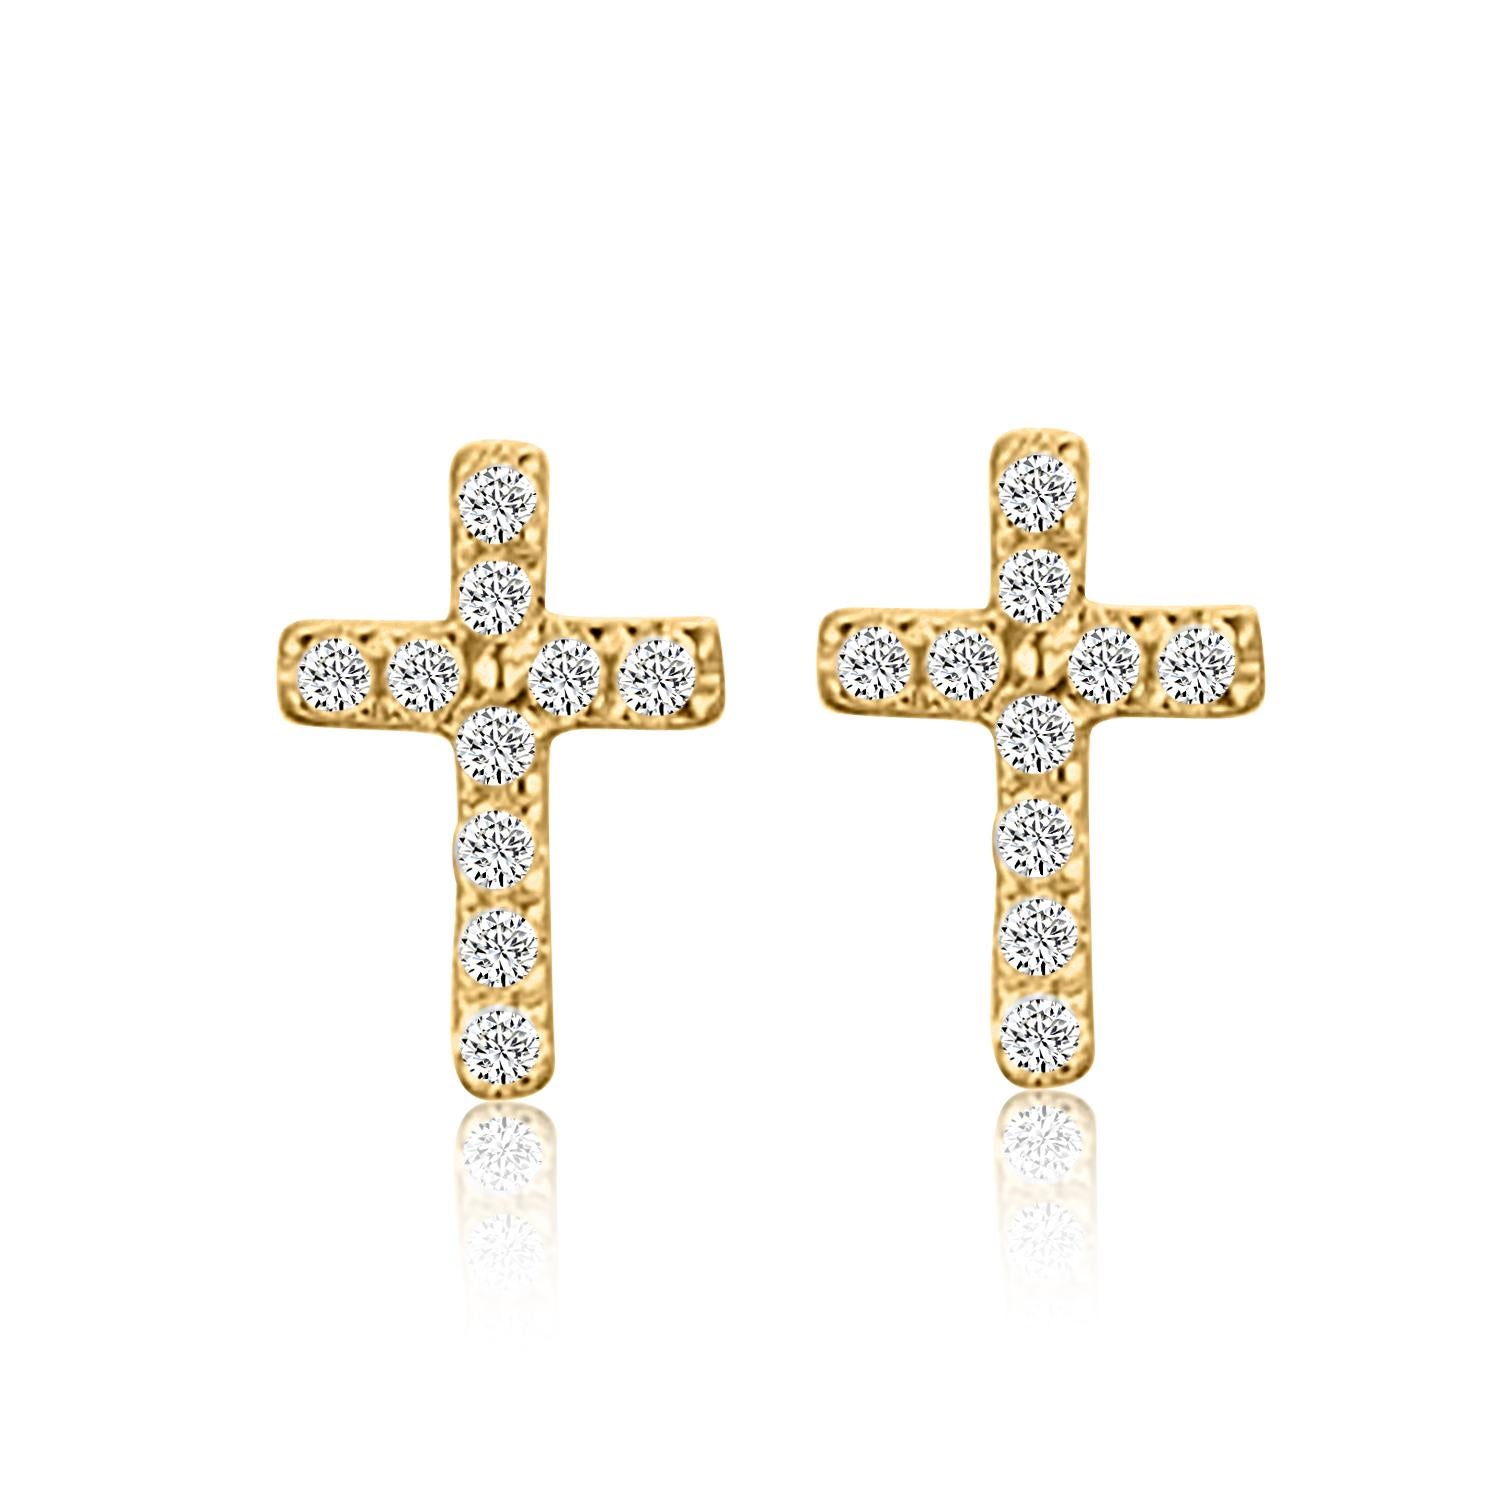 14K Natural Diamond Cross Stud Earring

Earring Information
Diamond Type : Natural Diamond
Metal : 14k Gold
Metal Color : Rose Gold, Yellow Gold, White Gold
Total Carat Weight : 0.058 ttcw
Diamond colour-clarity :	G/H Color VS/Si1 Clarity
 

JEWELRY